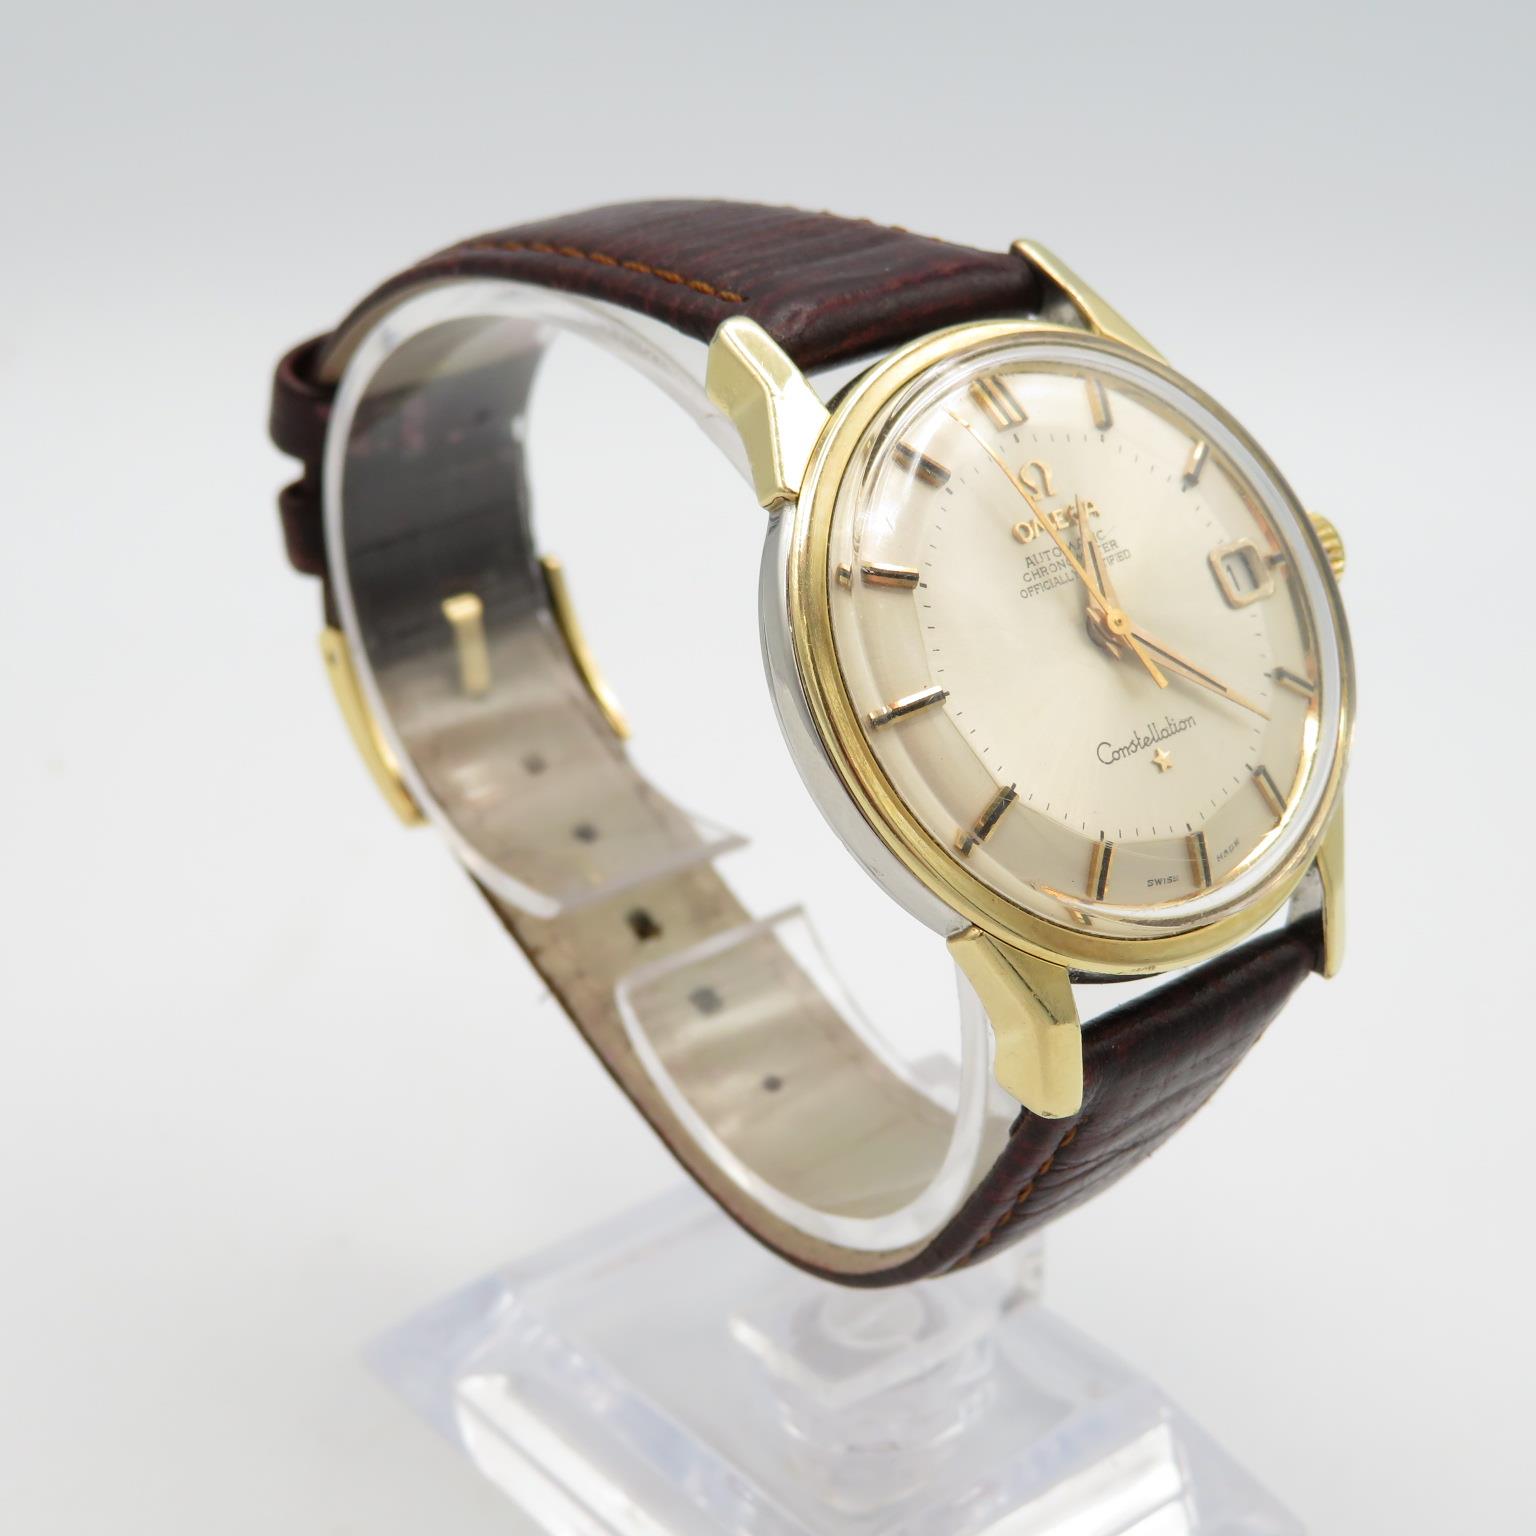 Omega Constellation Pie pan dial. Gents gold capped case. Automatic. Working. Silvered pie pan dial. - Image 4 of 8